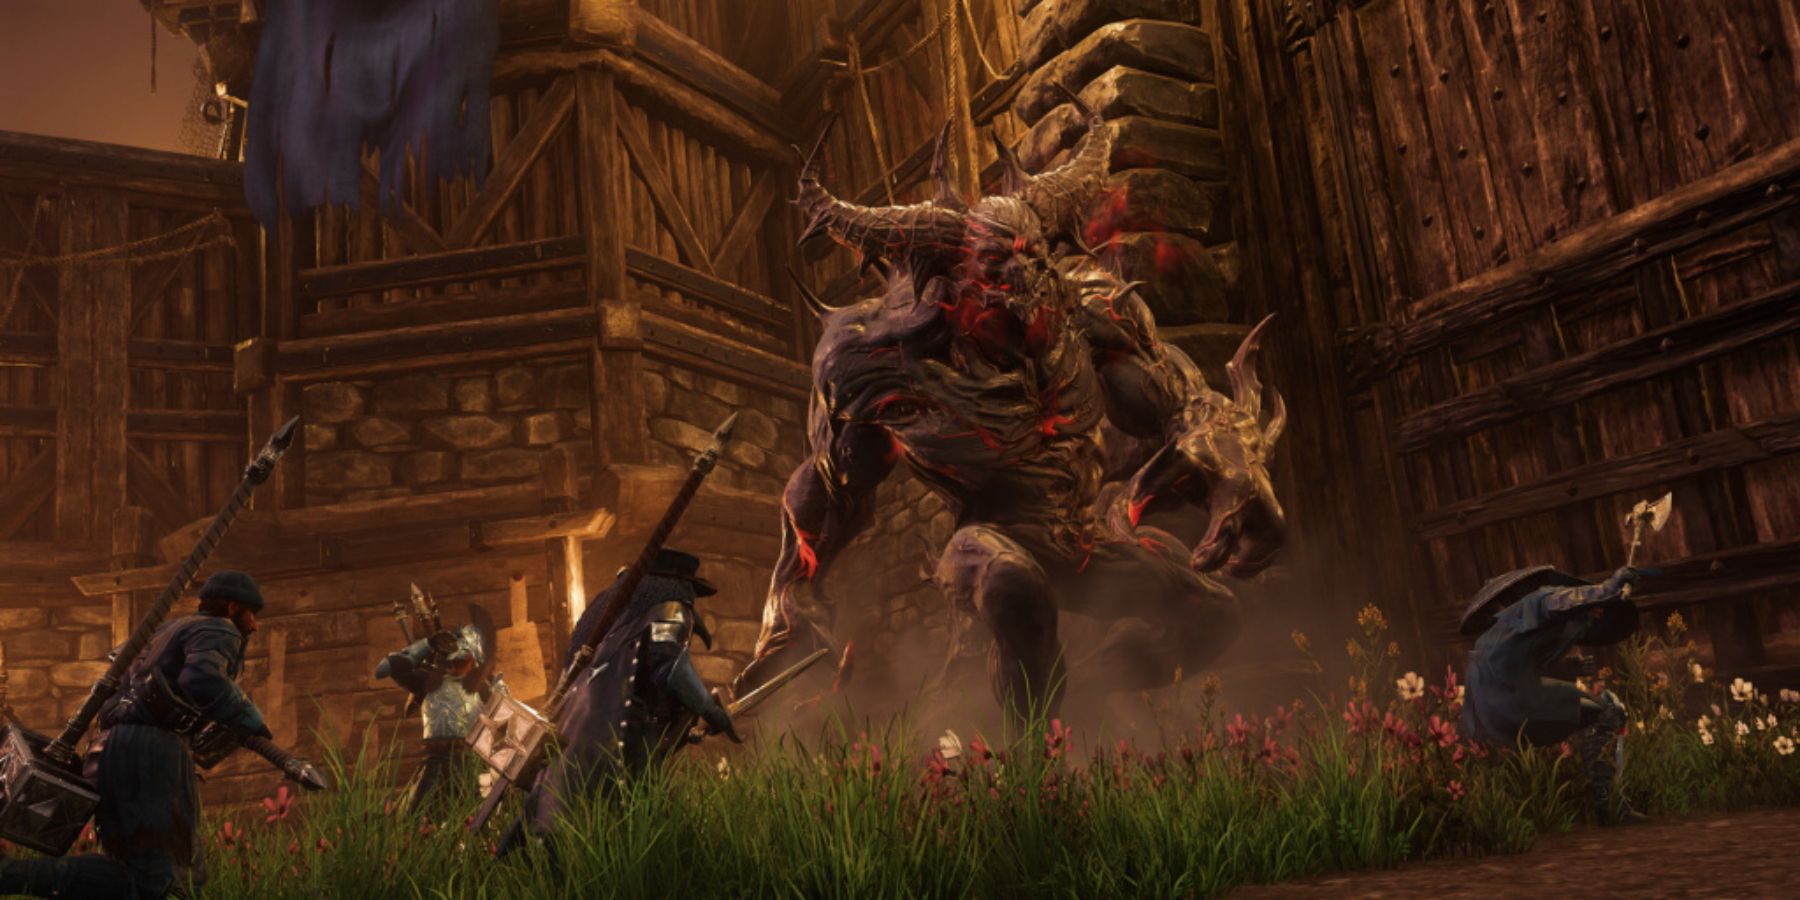 Players fighting one of the larger bosses in New World